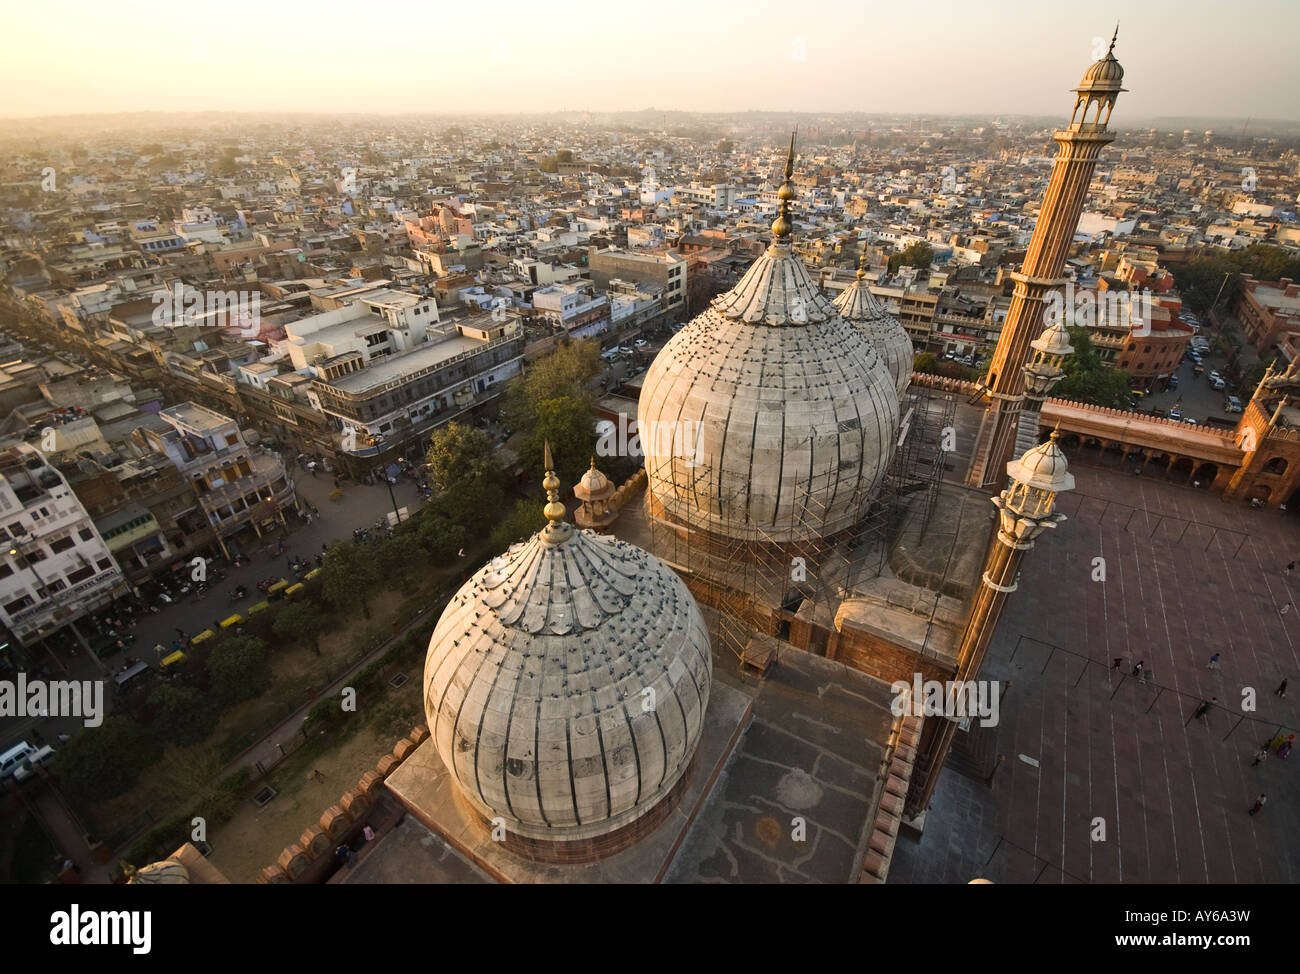 A view of Delhi from a minaret of the Jama Masjid mosque in Delhi in India Stock Photo